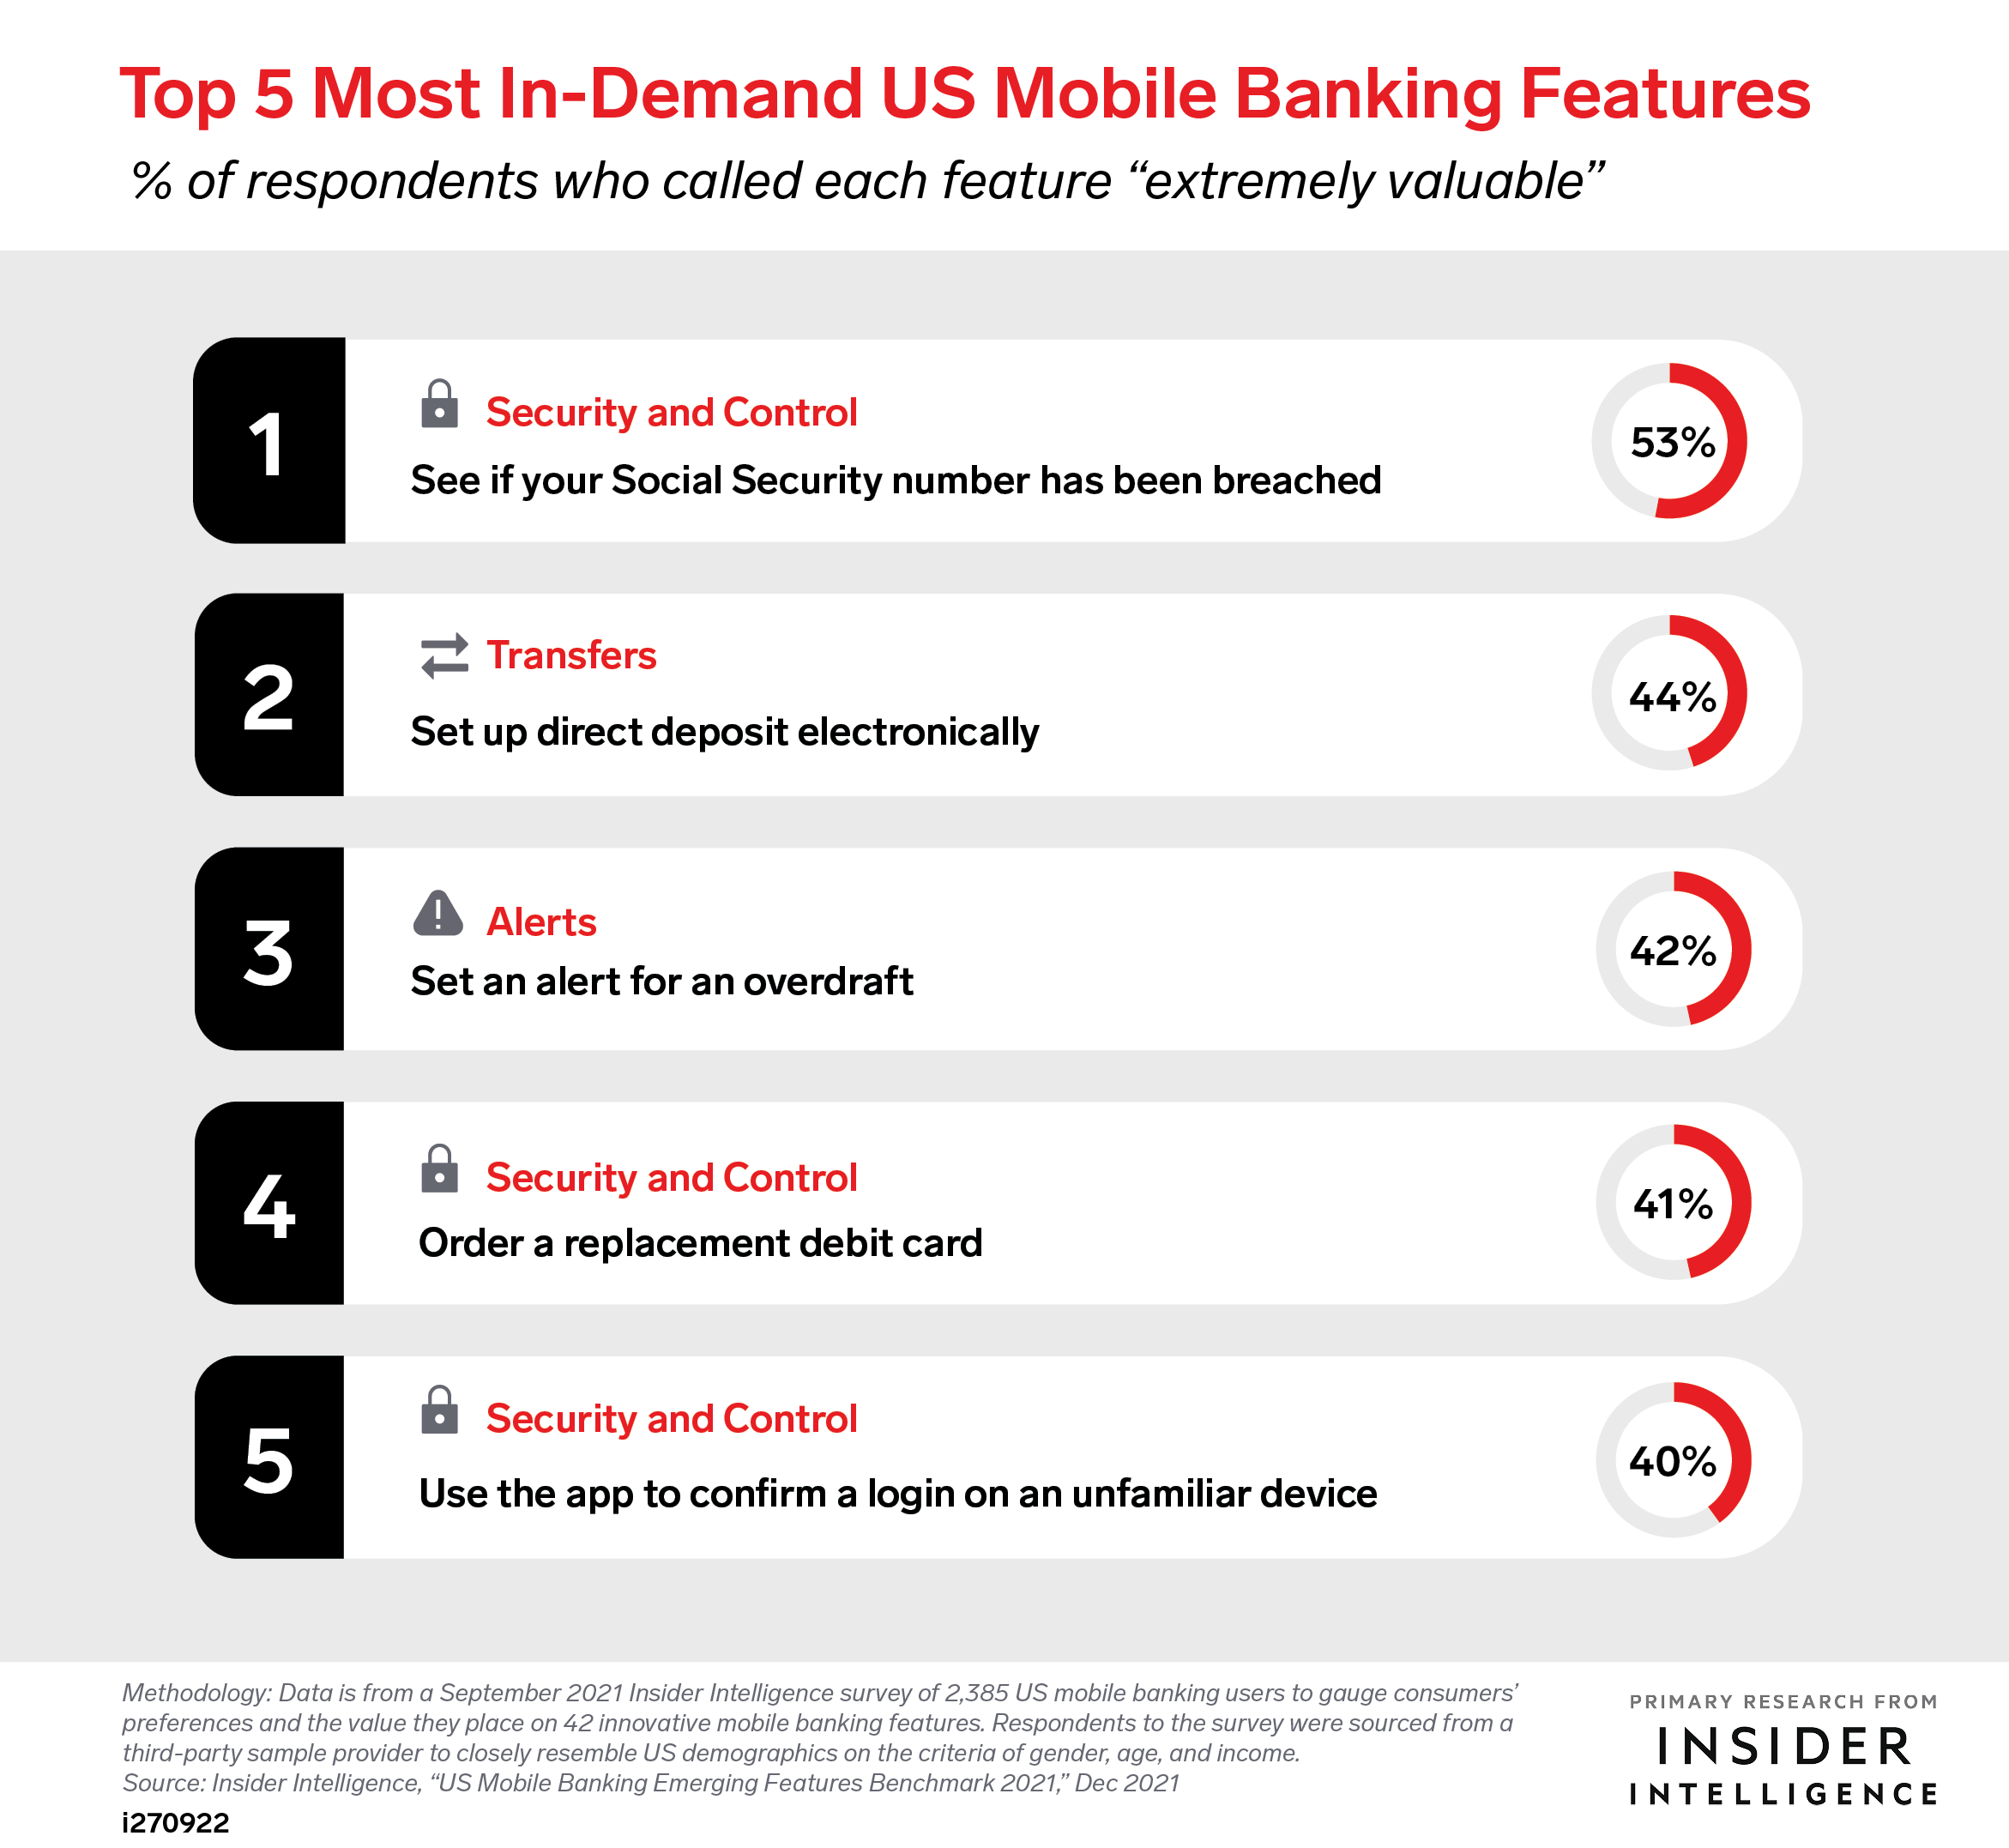 Top 3 In-Demand Mobile Banking Features, by Feature Segment (% of respondents who rate feature 